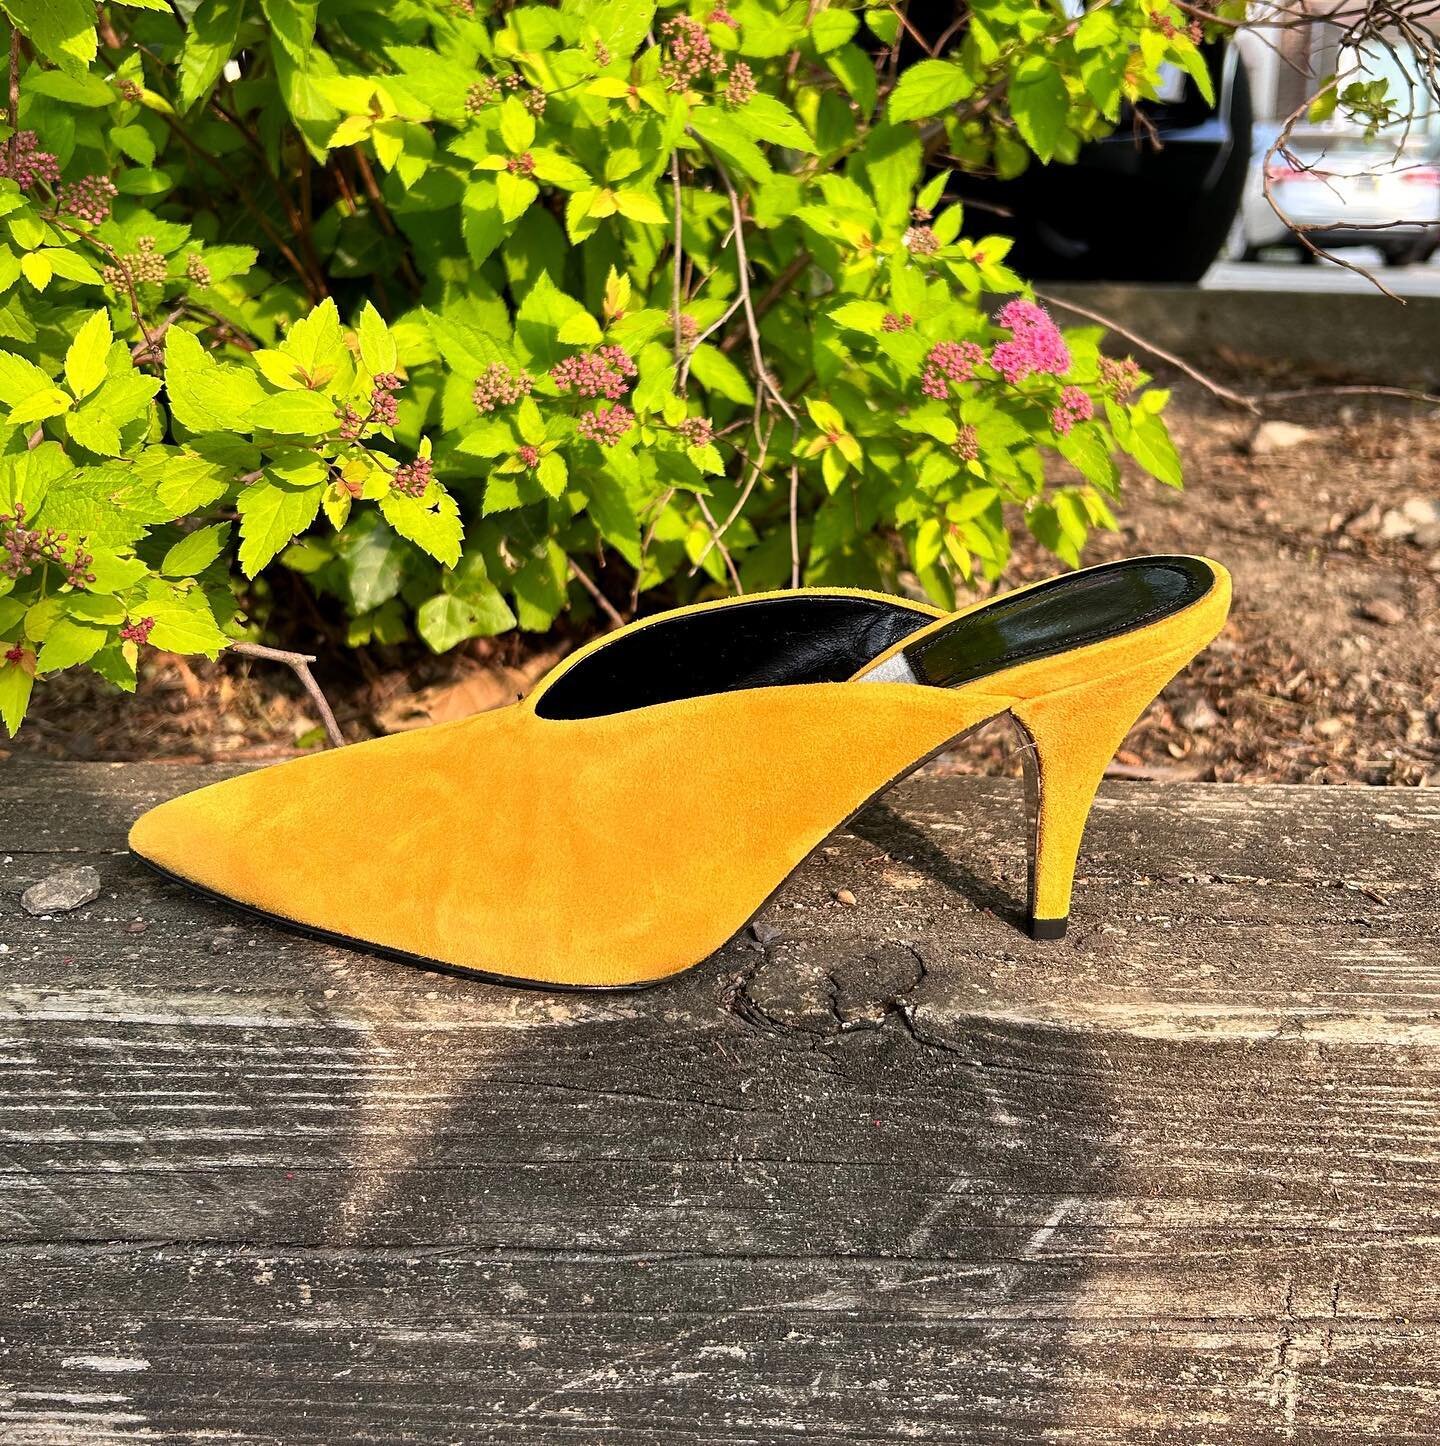 🌟Calvin Klein🌟 Stop by and check out these beautiful yellow pumps from Calvin Klein✨ 

Available for 200.95
Size: 38.5

For inquiries call or email us!
Phone: 267.331.6725
Email: chestnuthill@greenestreet.com

@greenestreetchestnuthill is not affil